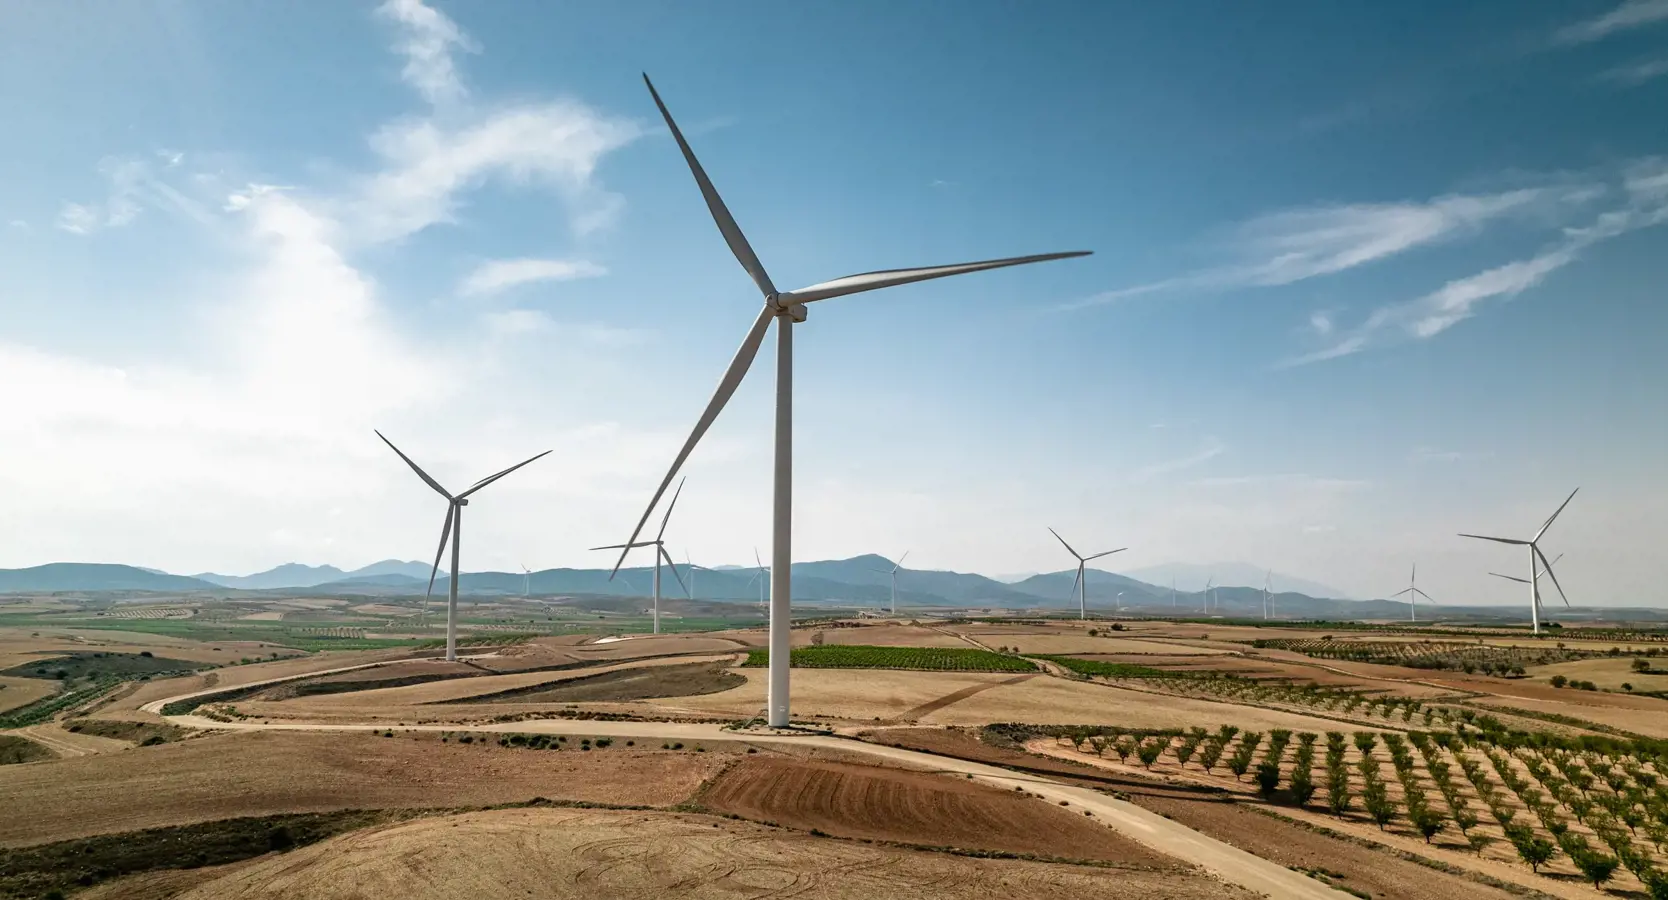 An image of an onshore windmill farm. The windmils are situated by a trail in an area of agriculture in Aragon, Spain.